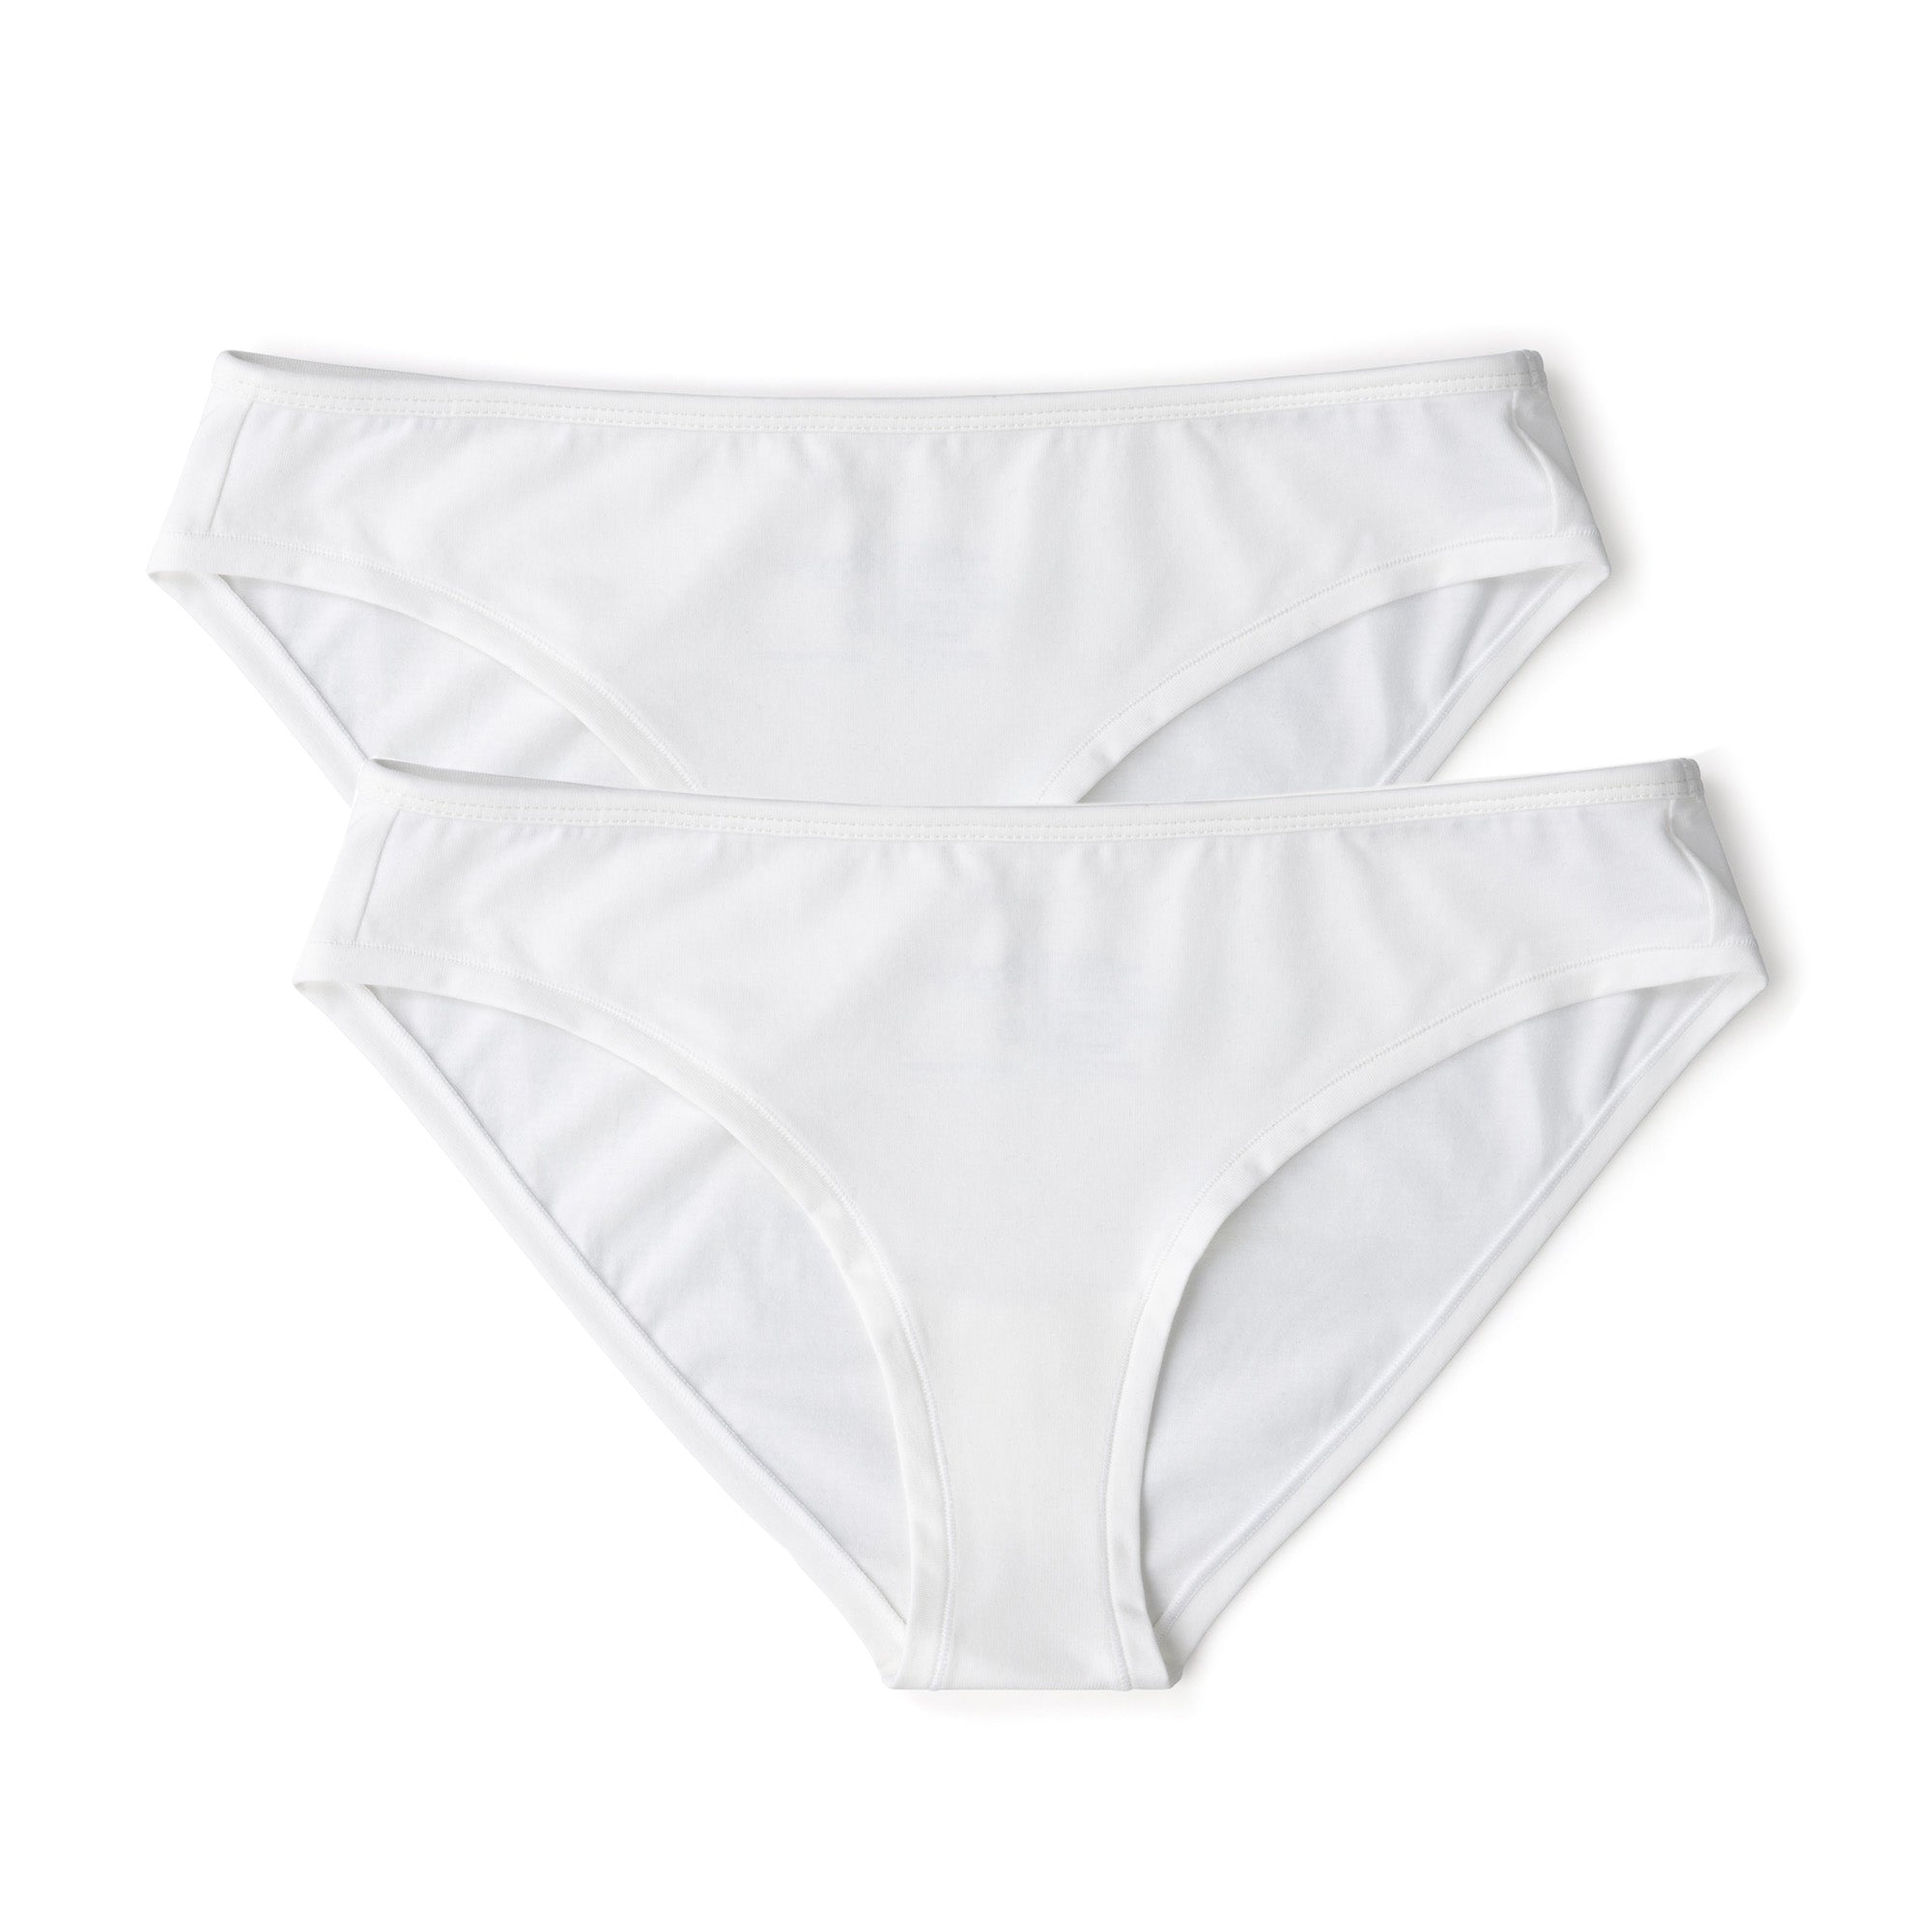 ladies briefs organic white cotton biodegradable recycled multipack